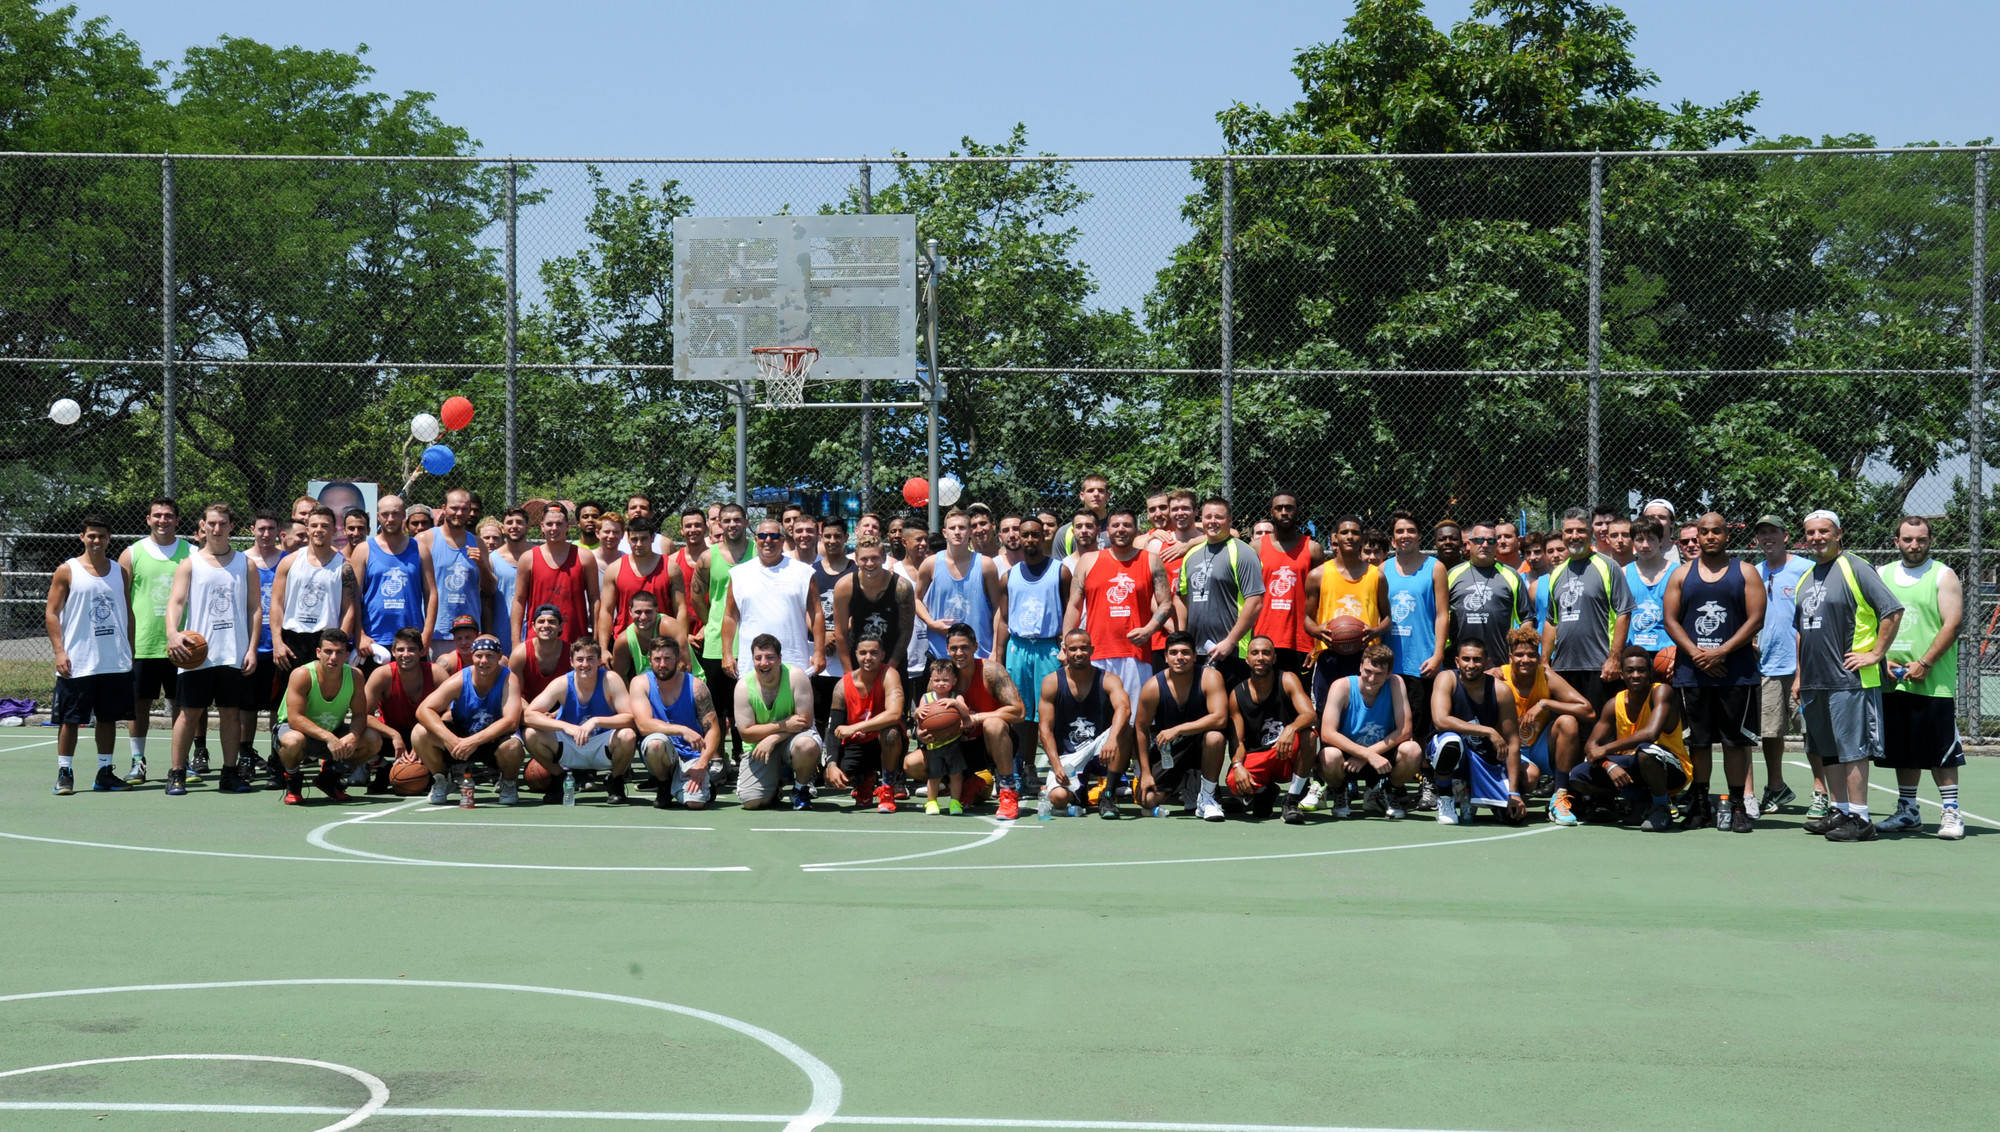 The many participants at the basketball tournament honoring Lance Cpl. Greg Buckley Jr.